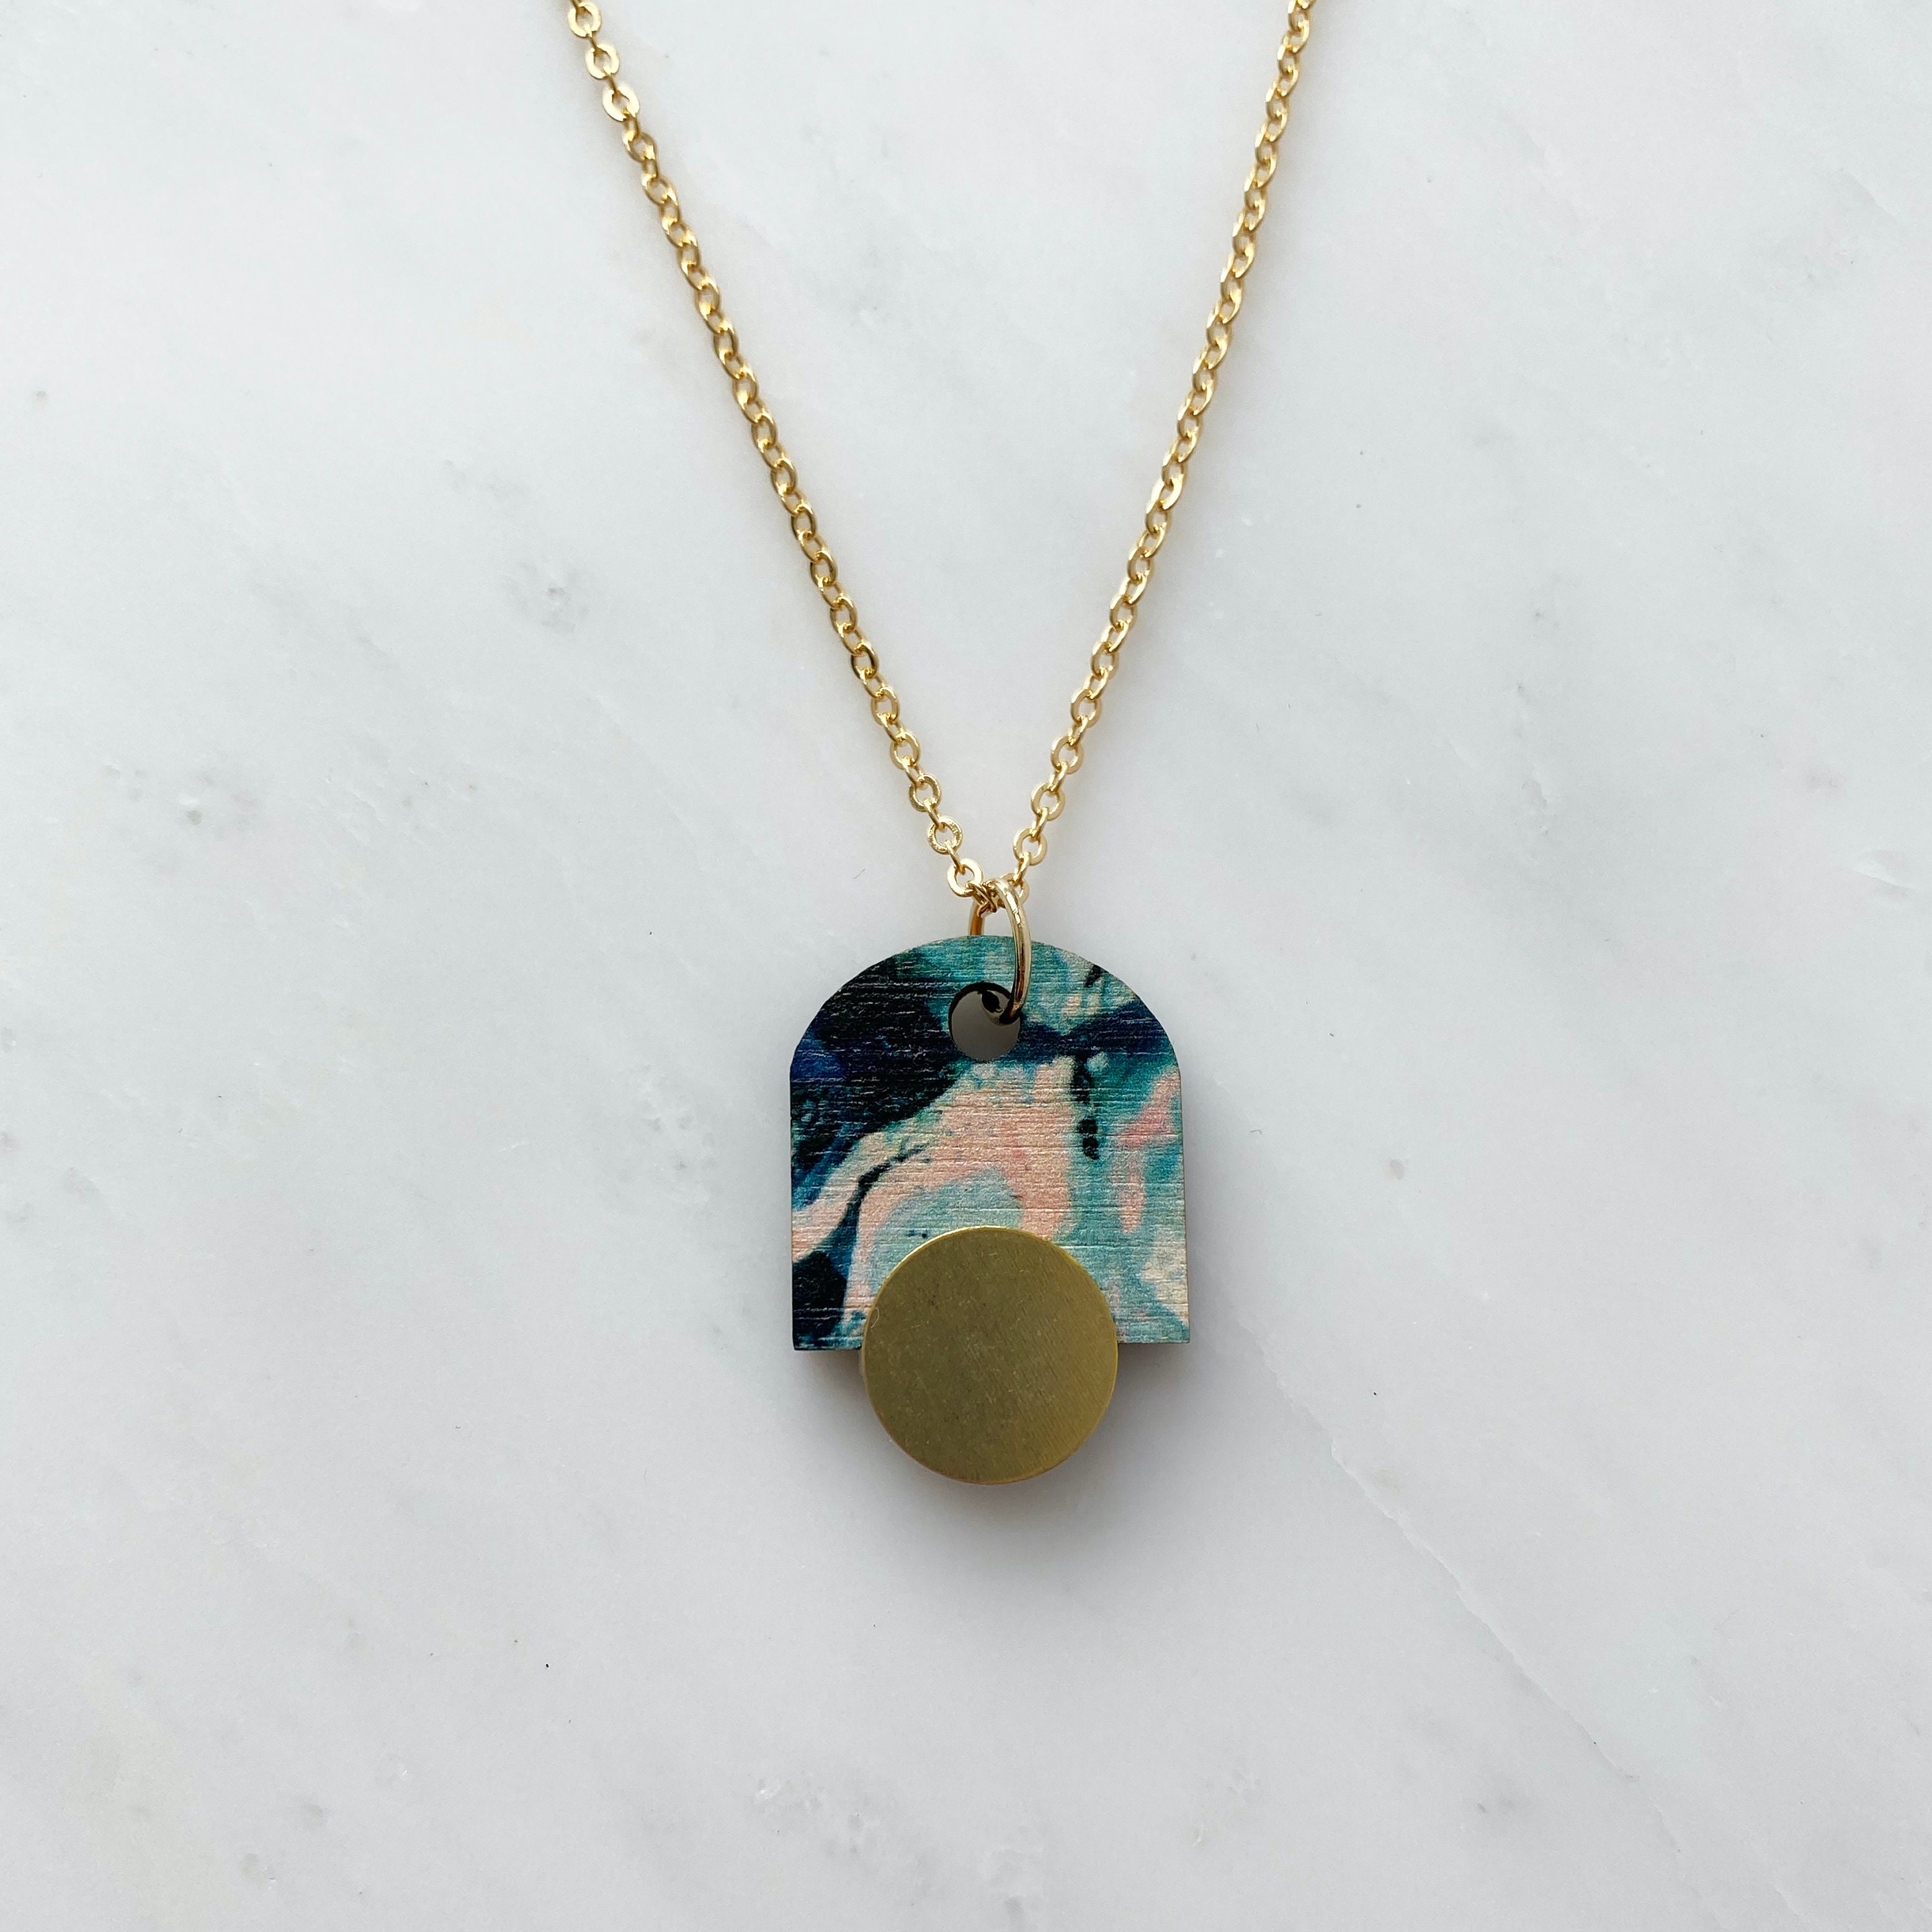 Marble Arch Necklace - Geometric Pendant Jewellery Gift For Her Minimal Arc